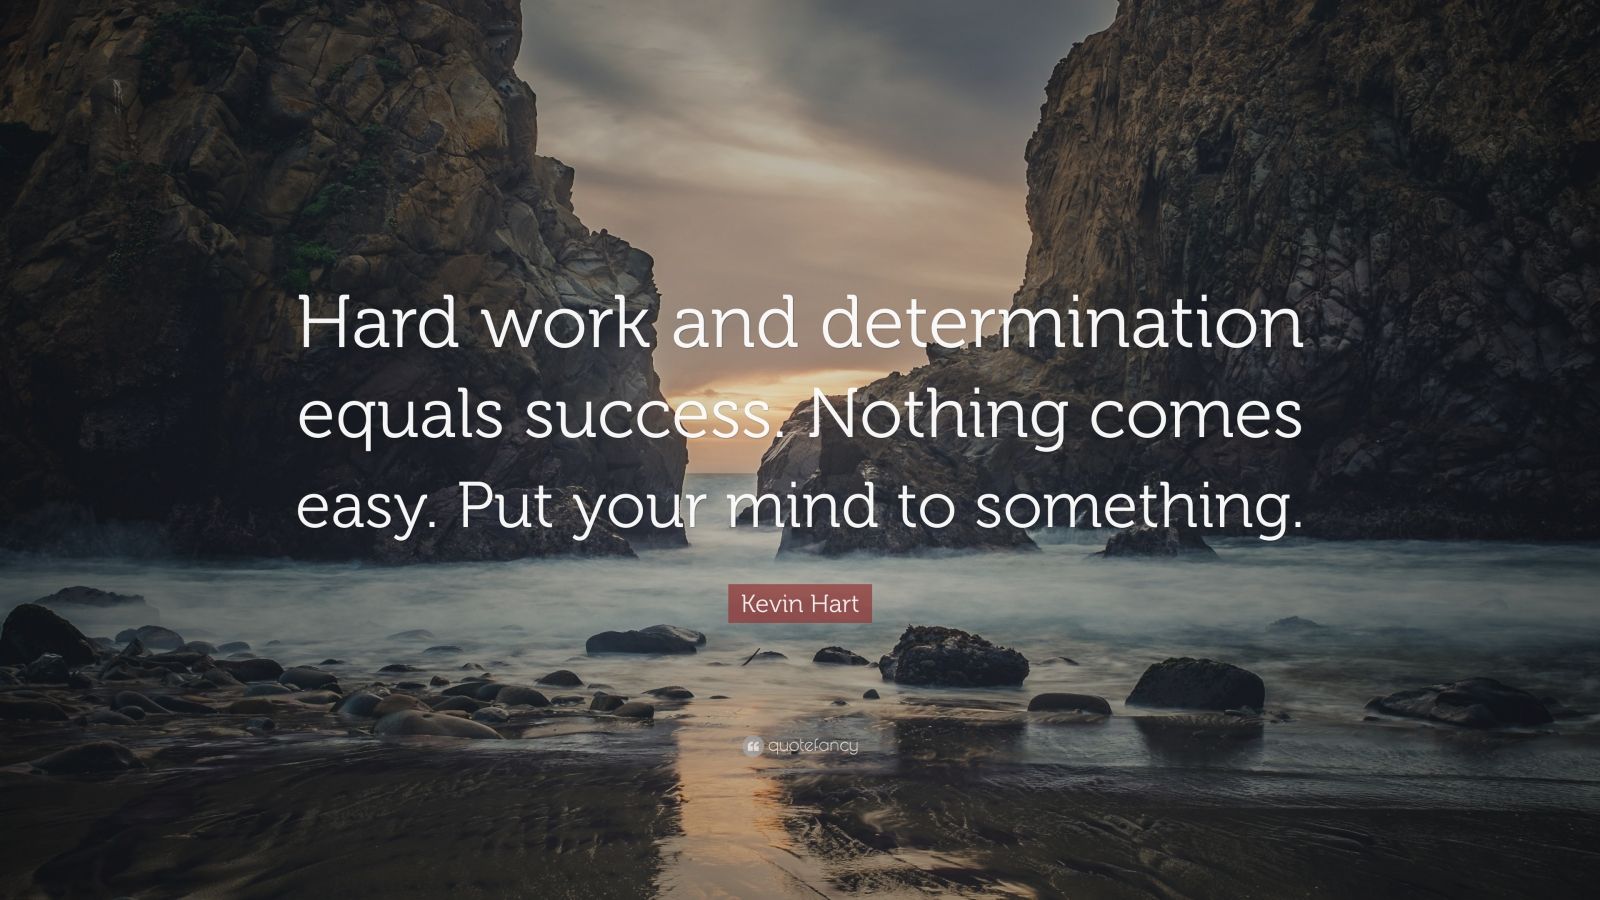 Kevin Hart Quote: “Hard work and determination equals success. Nothing